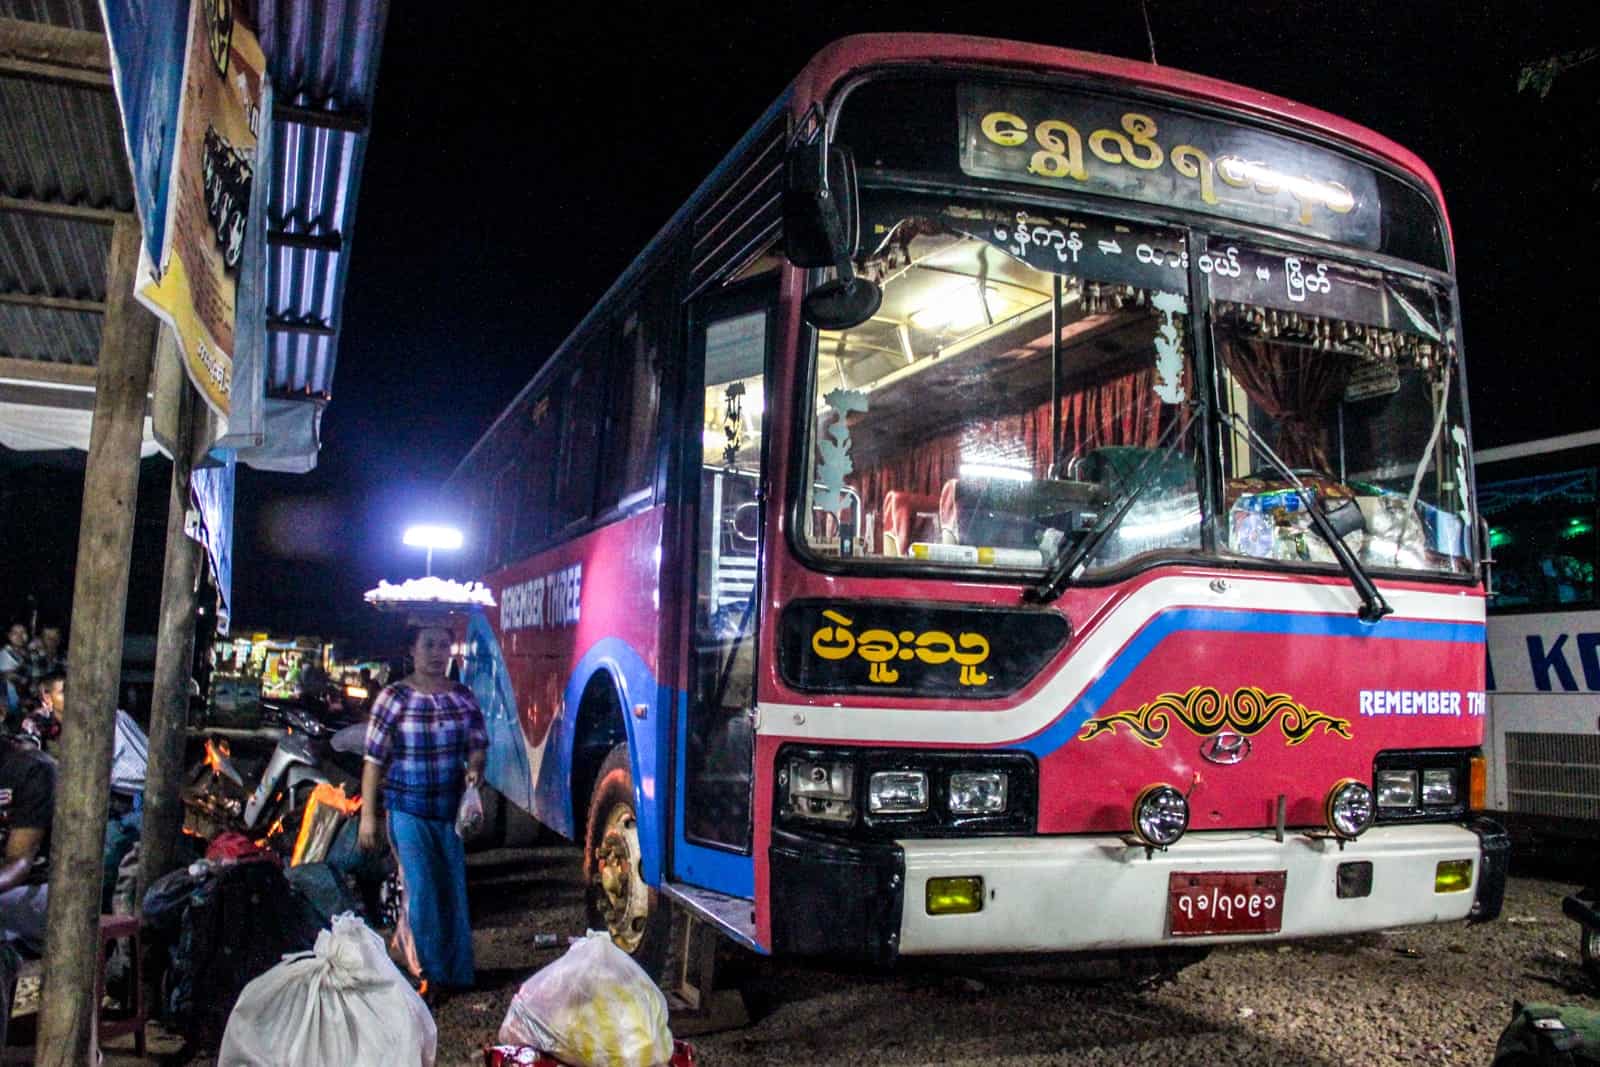 A red Myanmar night bus waits at the dusty station. Tied bags of rubbish stand to the left of the bus, as a woman walks buy carrying a plate of goods on her head. 